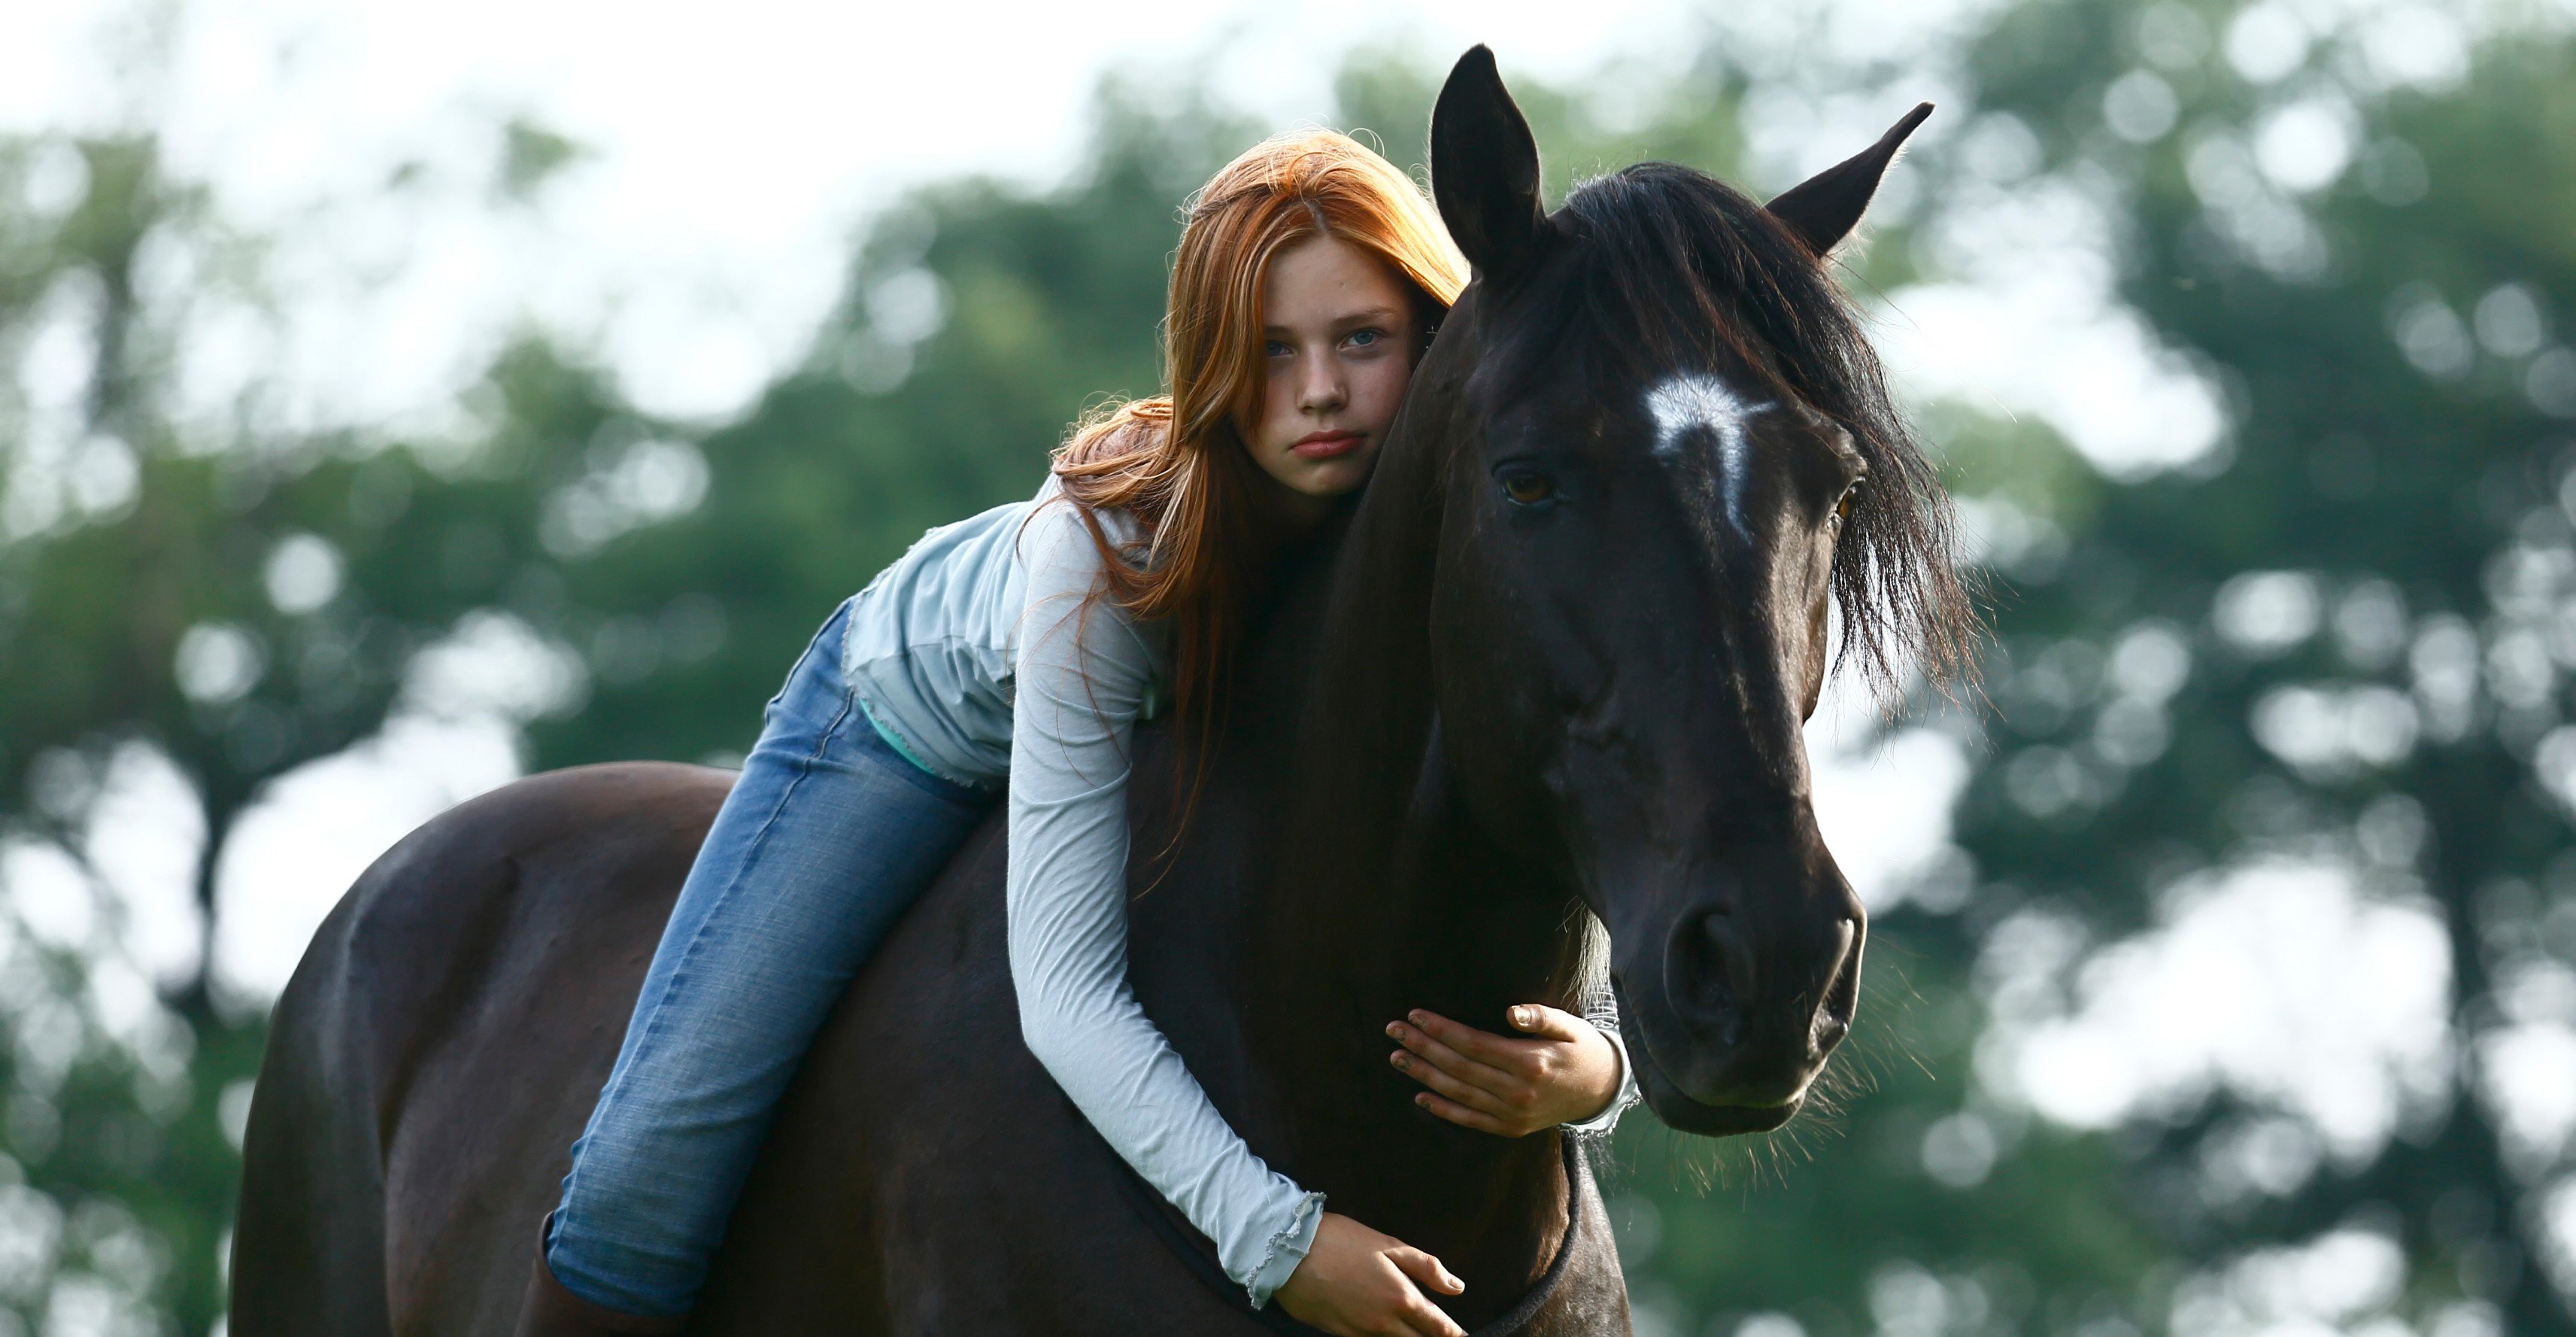 women, Model, Long hair, Redhead, Women outdoors, Nature, Animals, Horse, Horse riding, Trees, Blue eyes, Jeans, Looking at viewer, Hugging Wallpaper